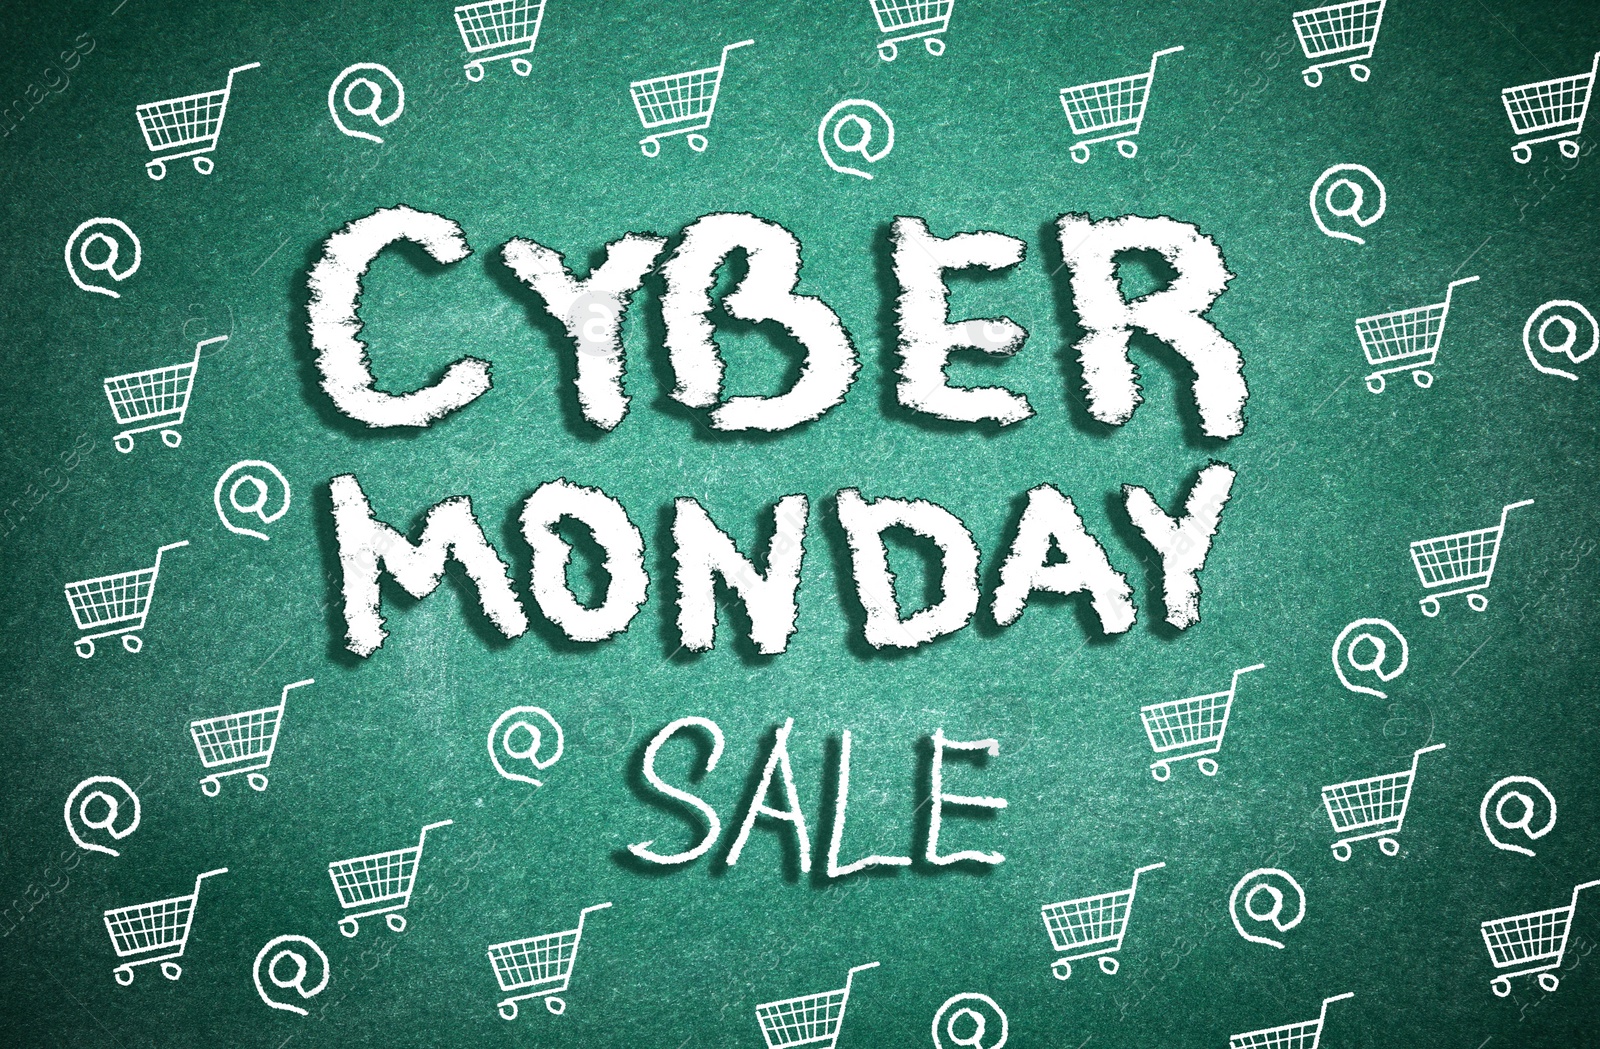 Illustration of  Text Cyber Monday Sale and pictures of small shopping carts on green chalkboard